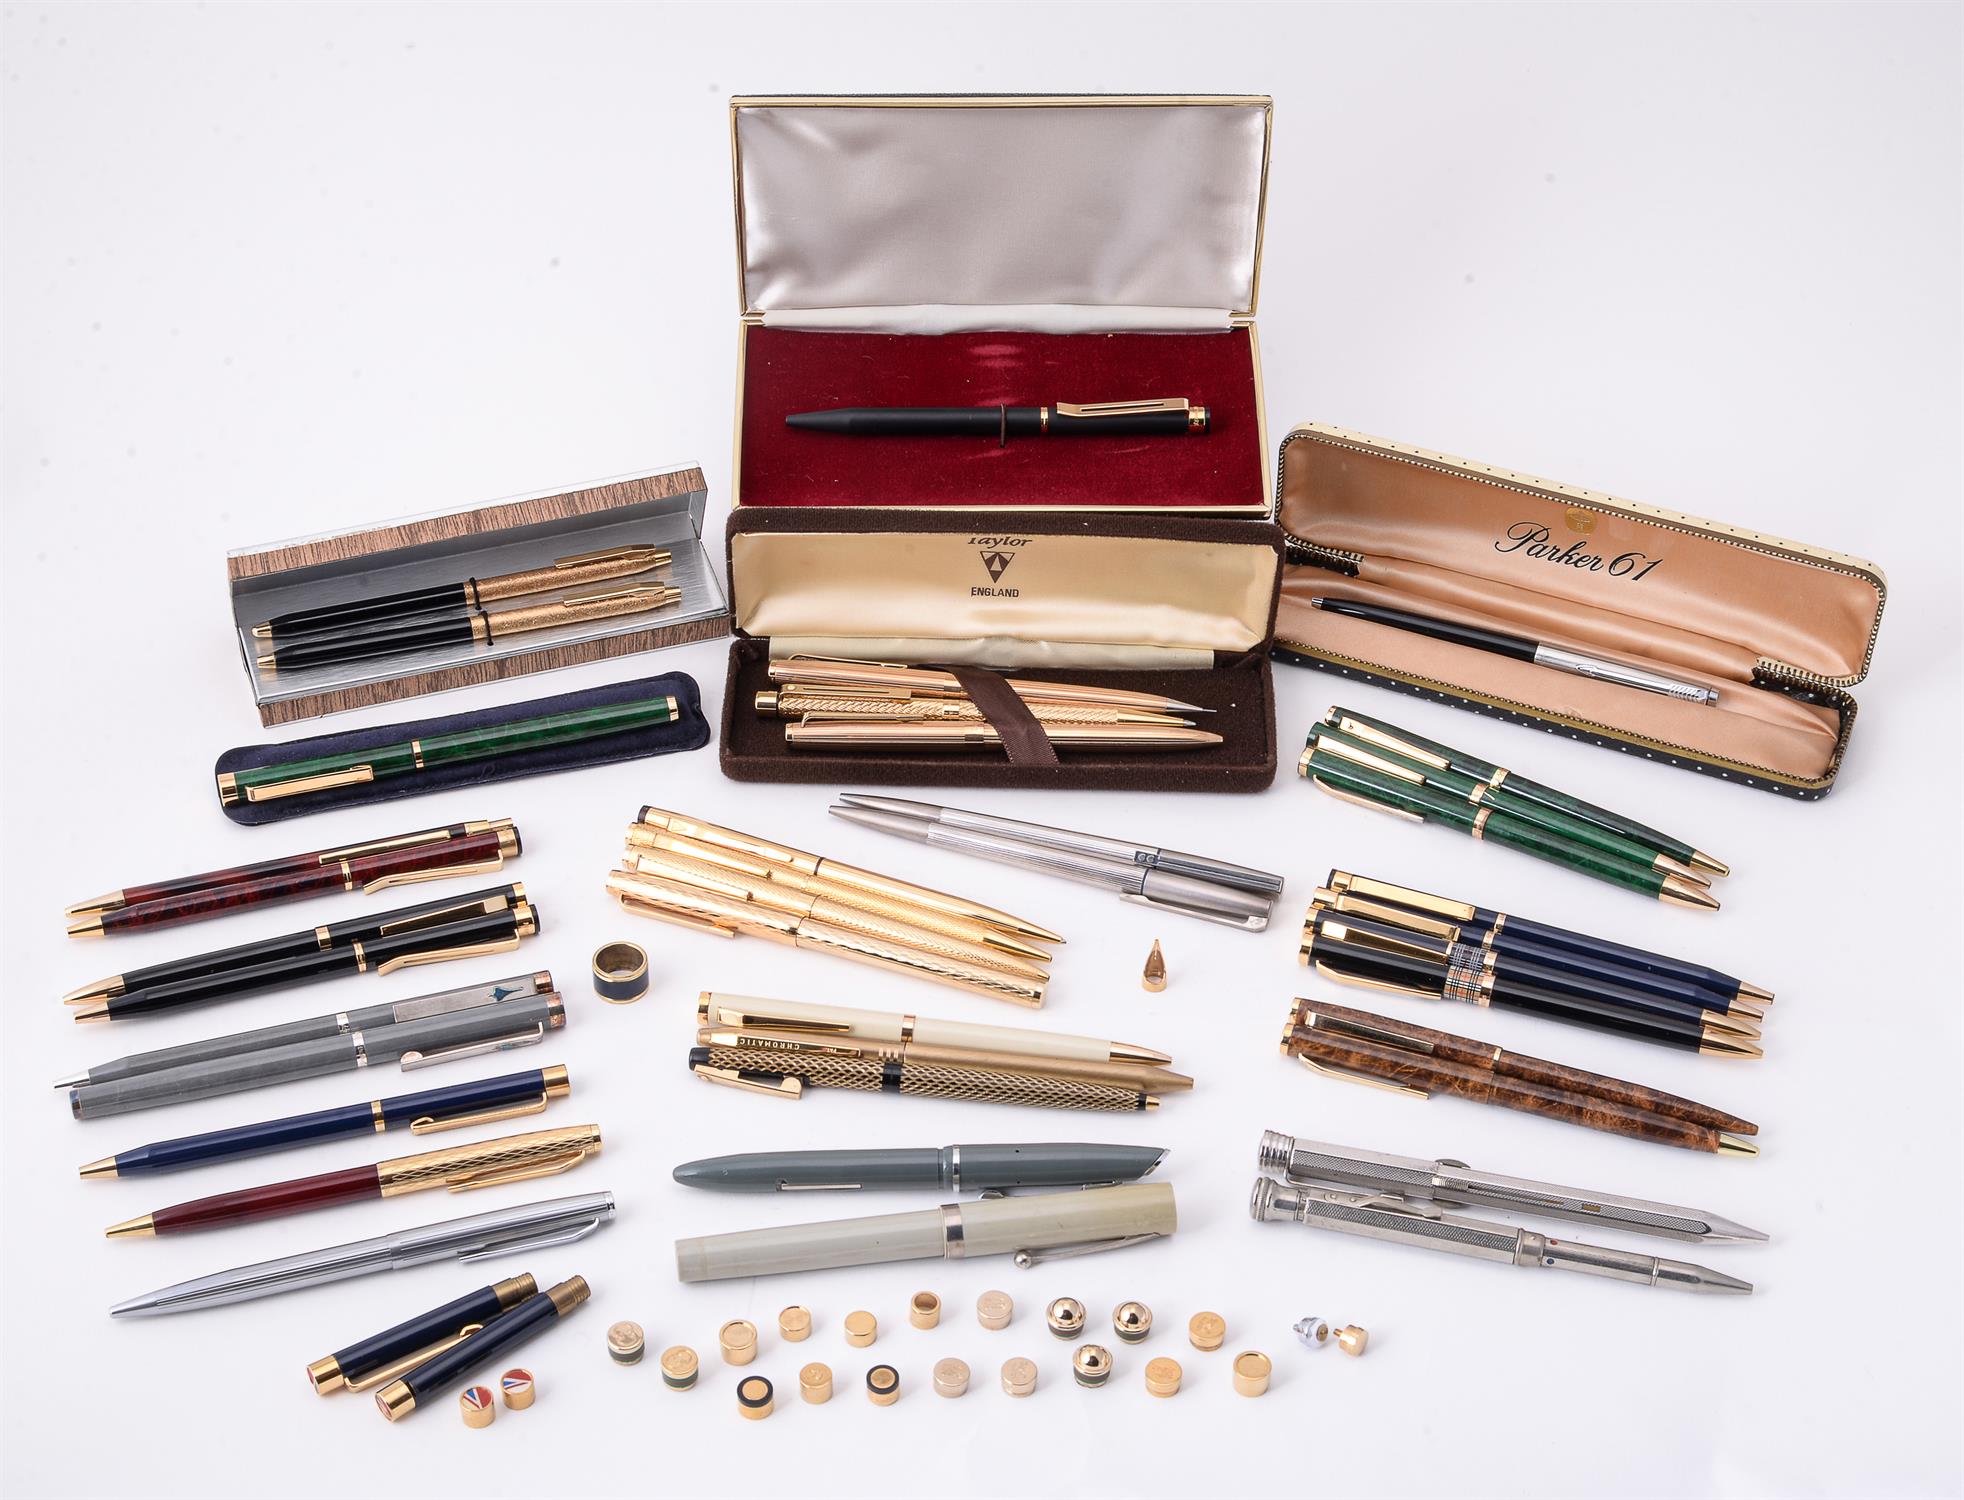 A collection of ball point pens, roller ball pens and propelling pencils